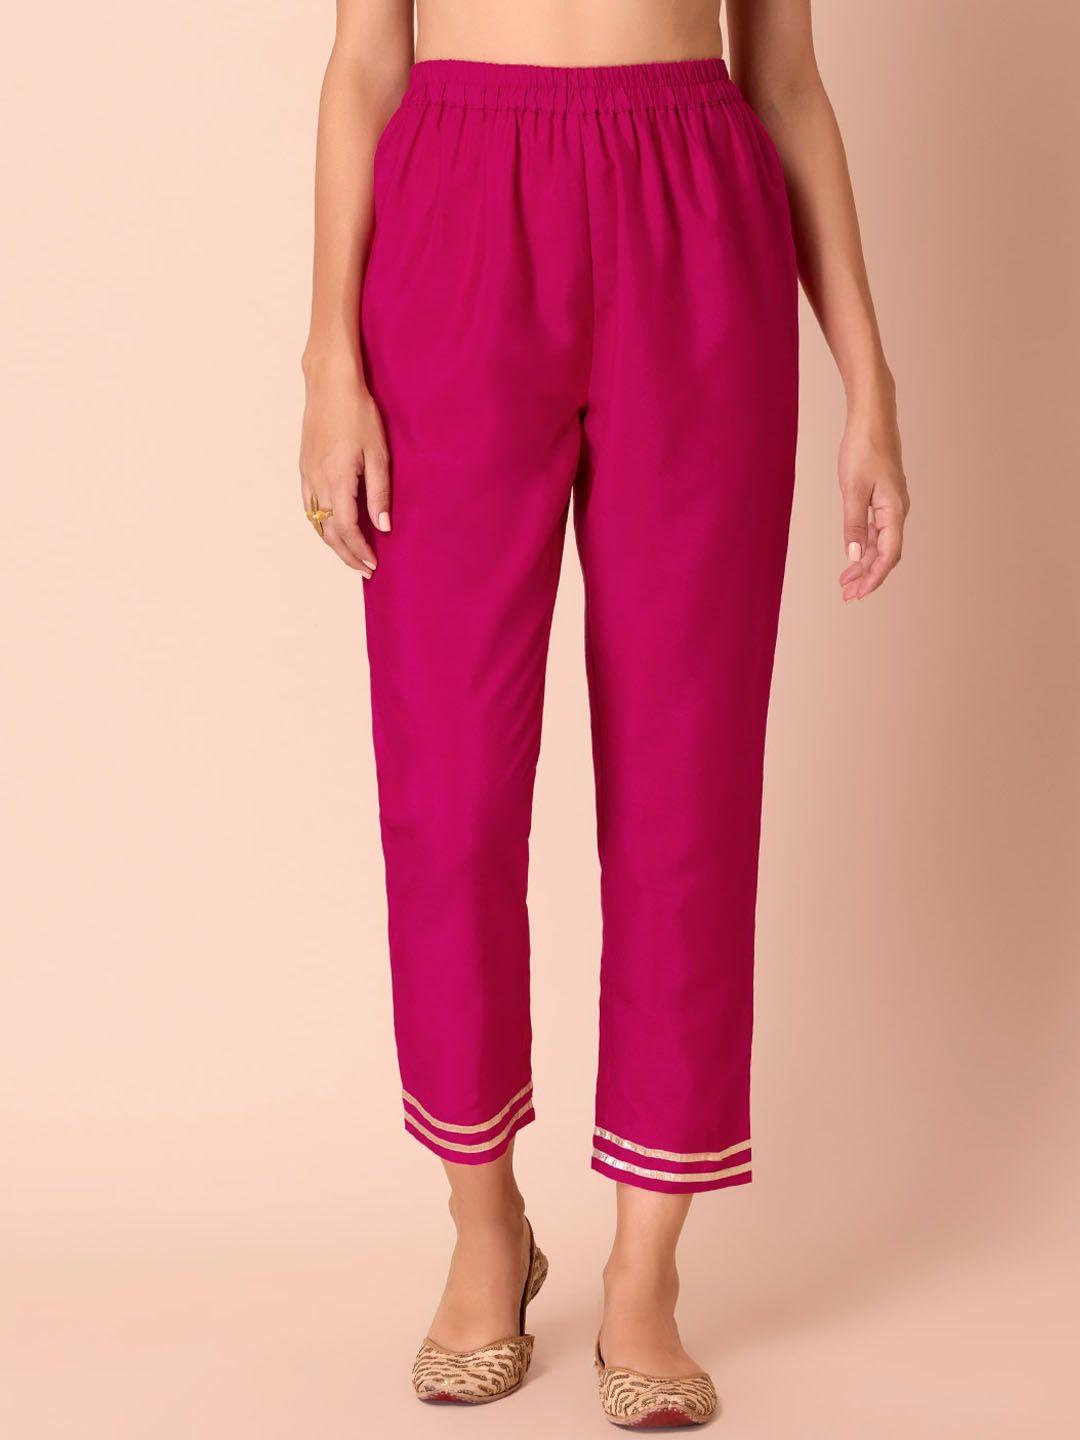 indya-women-pink-art-silk-fitted-trousers